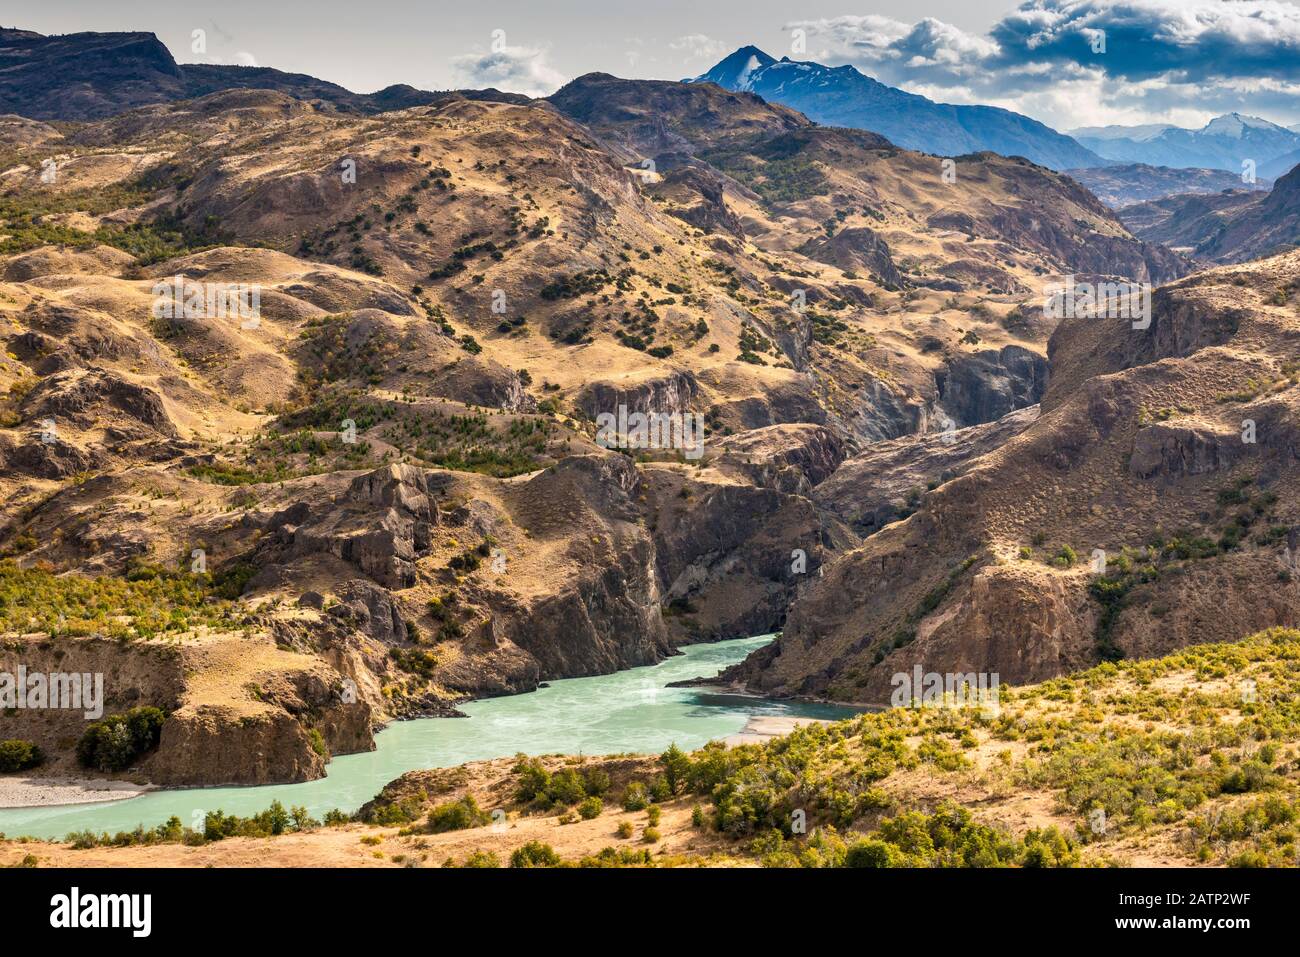 Rio Baker at confluence with small Rio Chacabuco, view from Carretera Austral, Chacabuco Valley area, future Patagonia National Park, Chile Stock Photo